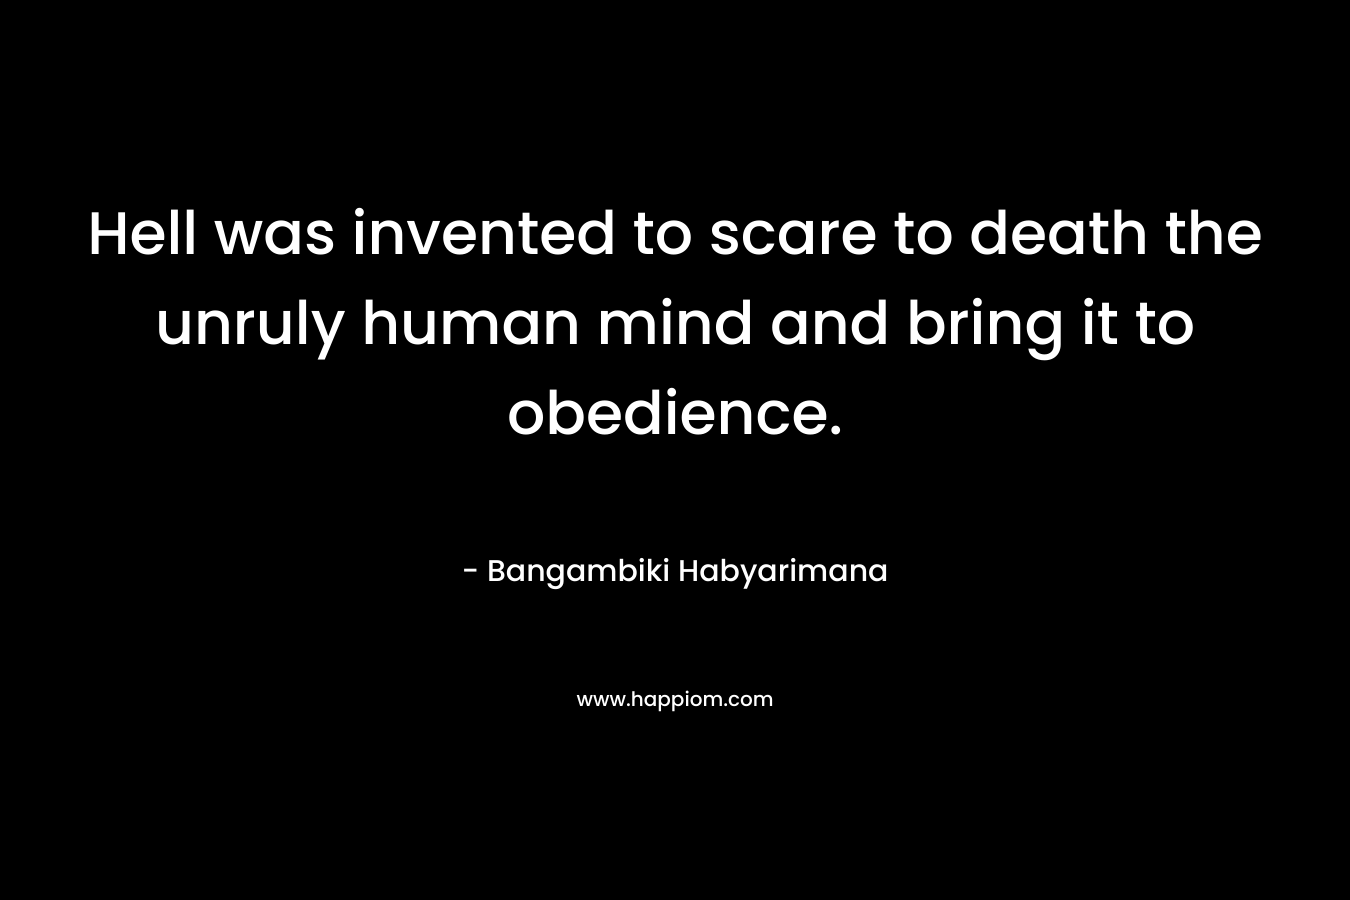 Hell was invented to scare to death the unruly human mind and bring it to obedience.